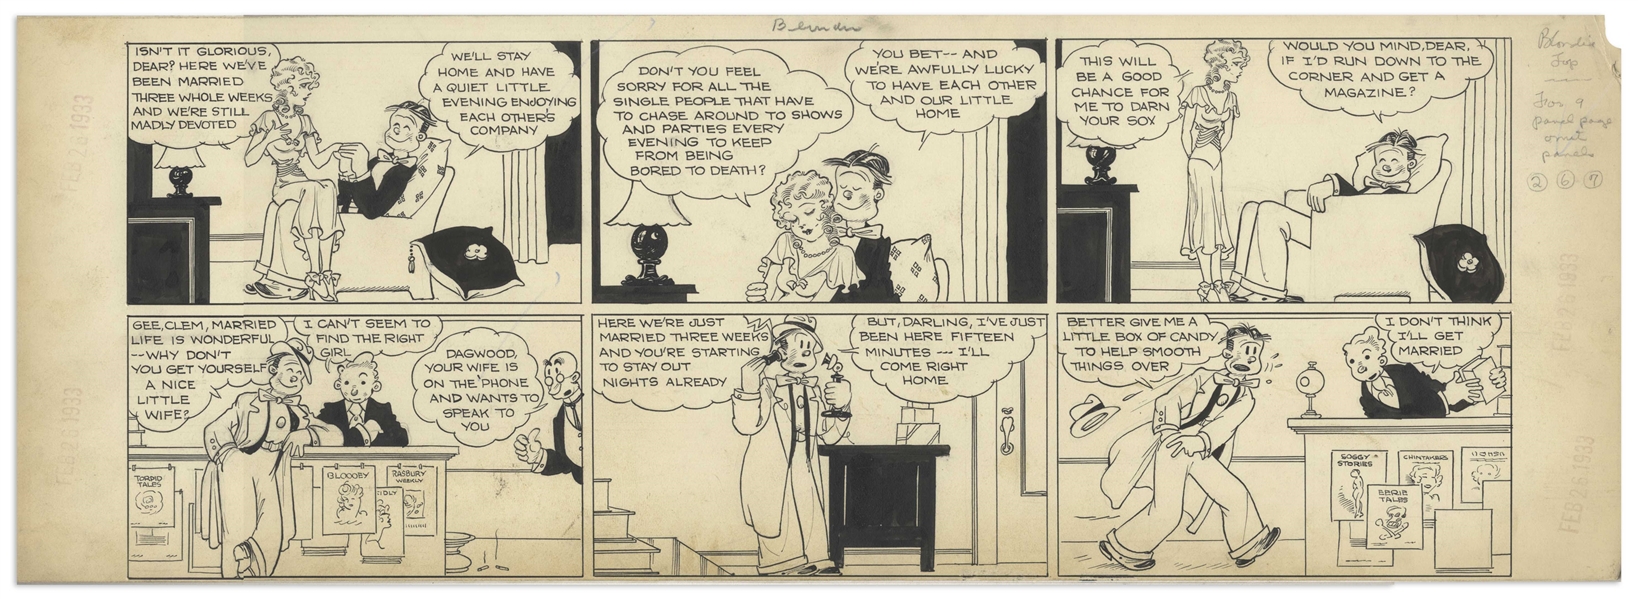 Chic Young Hand-Drawn ''Blondie'' Sunday Comic Strip From 1933 -- Blondie and Dagwood as Newlyweds, Just Days After Their Wedding